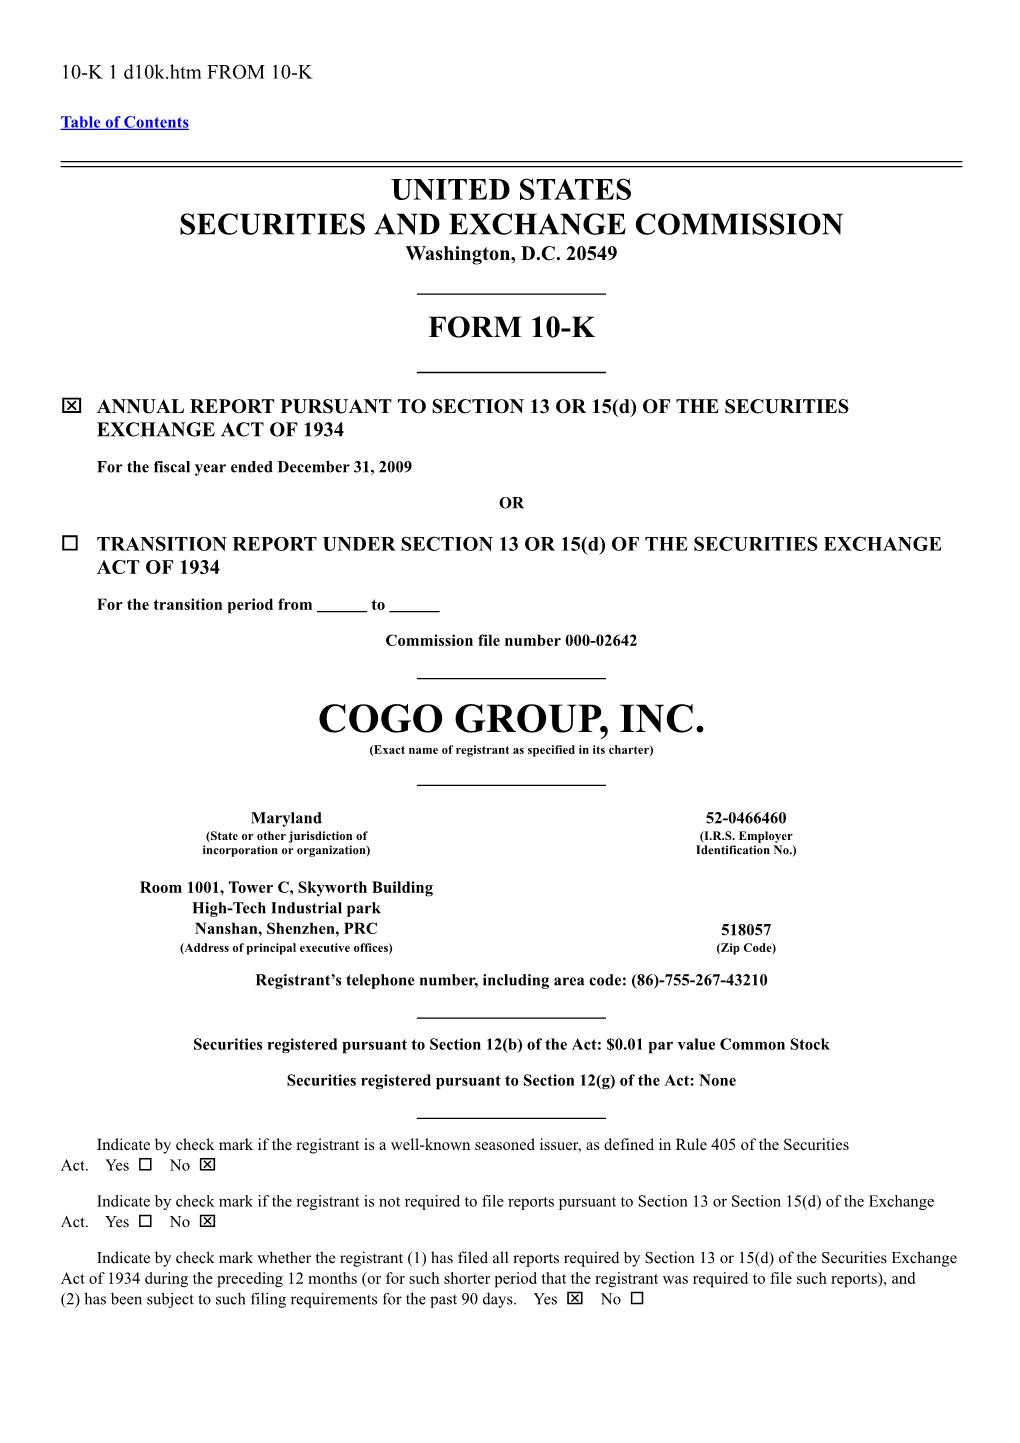 COGO GROUP, INC. (Exact Name of Registrant As Specified in Its Charter)